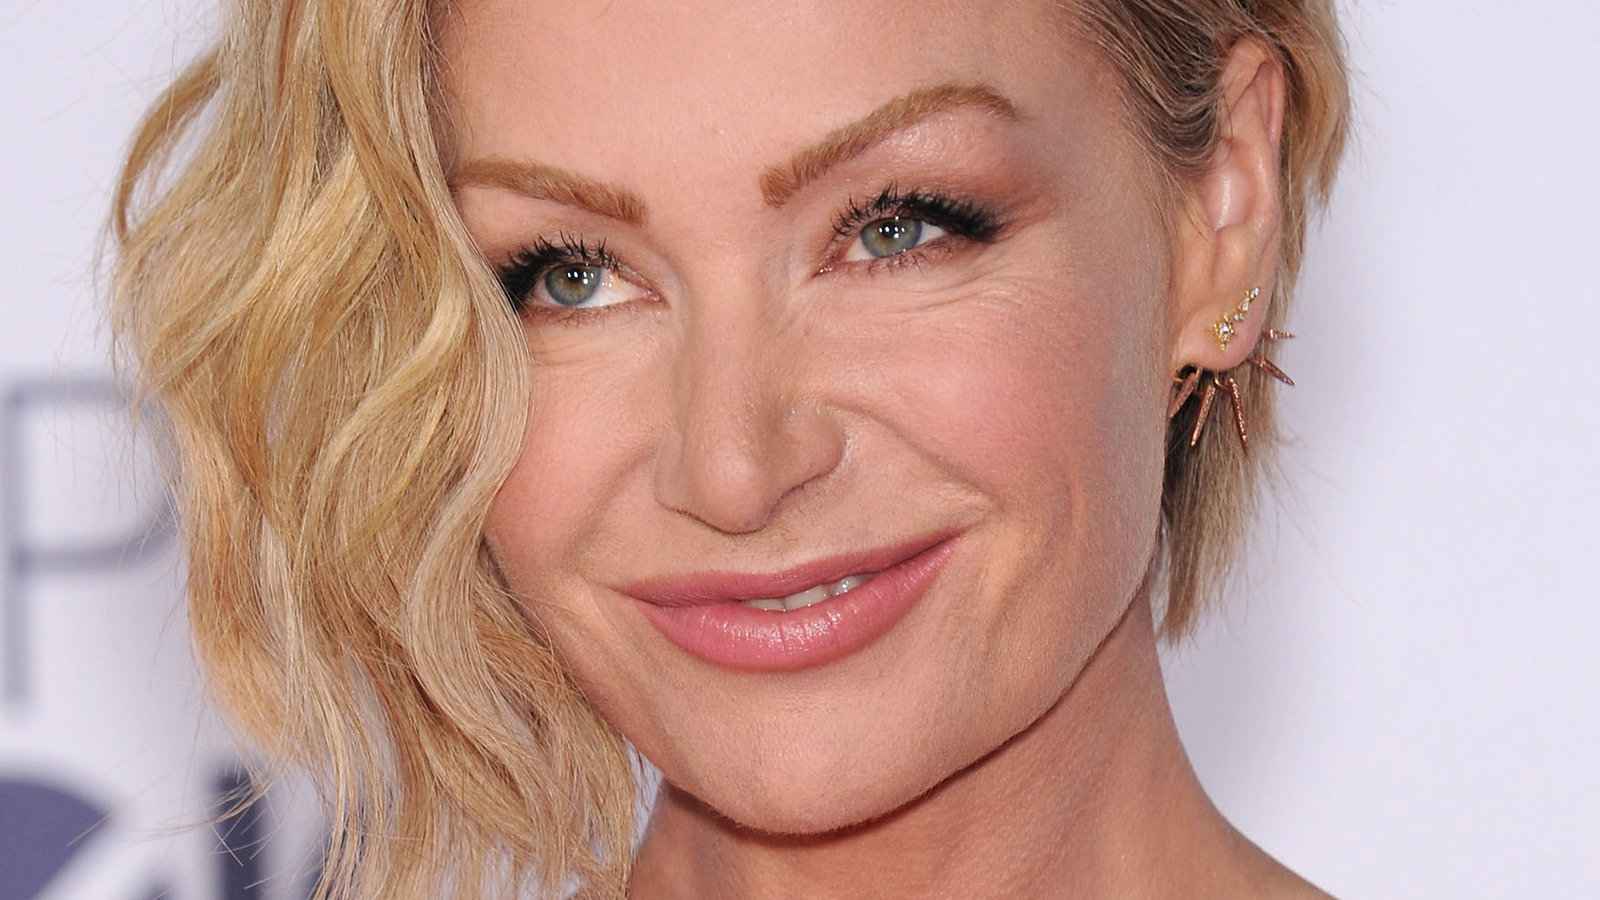 Stunning Portia de Rossi is easily one of the hottest gay actors out there